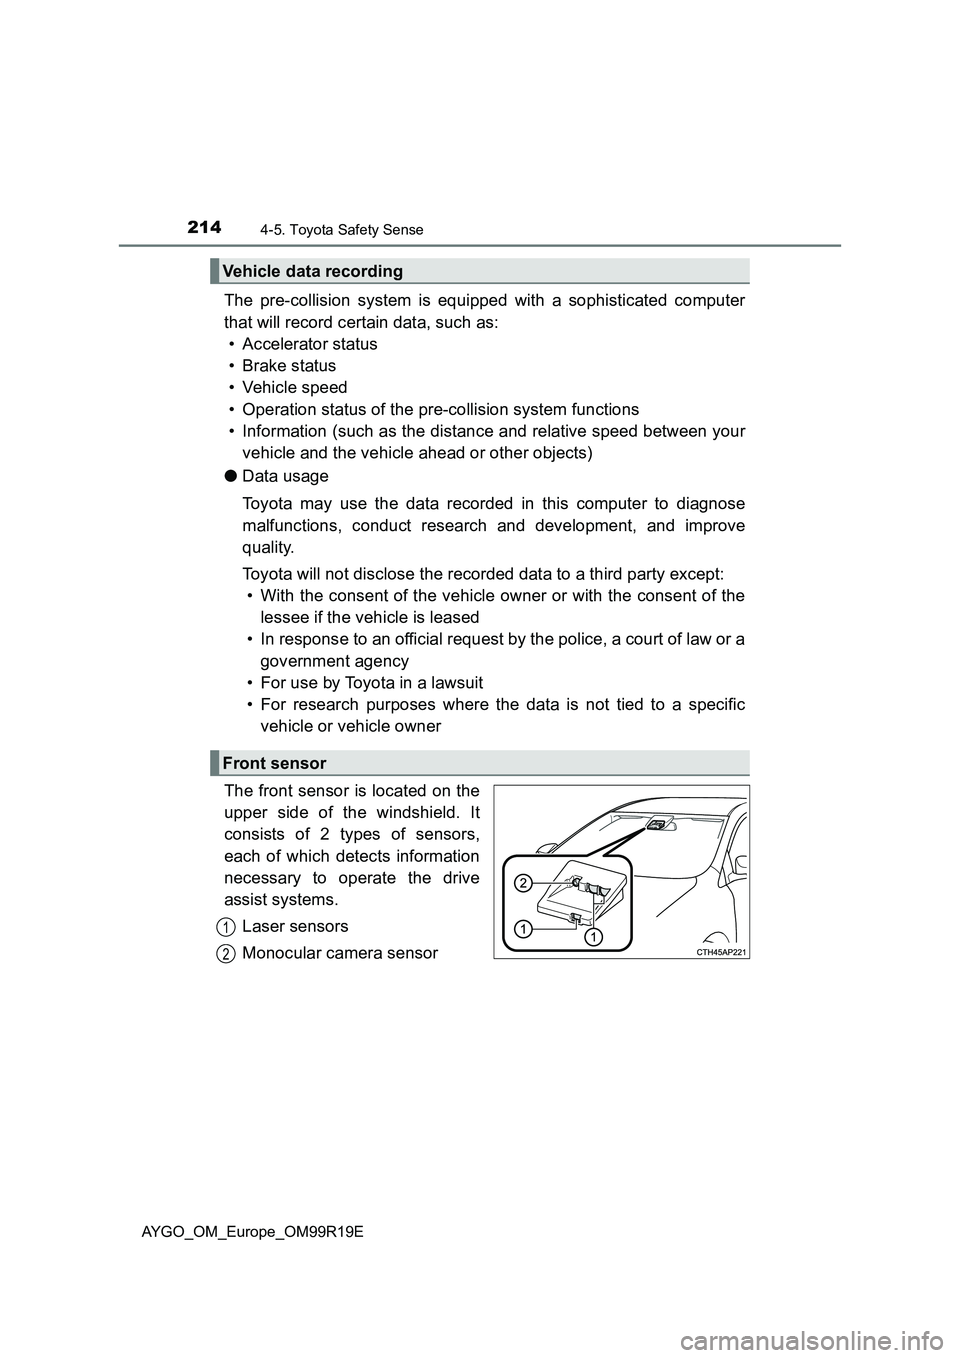 TOYOTA AYGO 2019  Owners Manual (in English) 2144-5. Toyota Safety Sense
AYGO_OM_Europe_OM99R19E
The pre-collision system is equipped with a sophisticated computer 
that will record certain data, such as: 
• Accelerator status 
• Brake statu